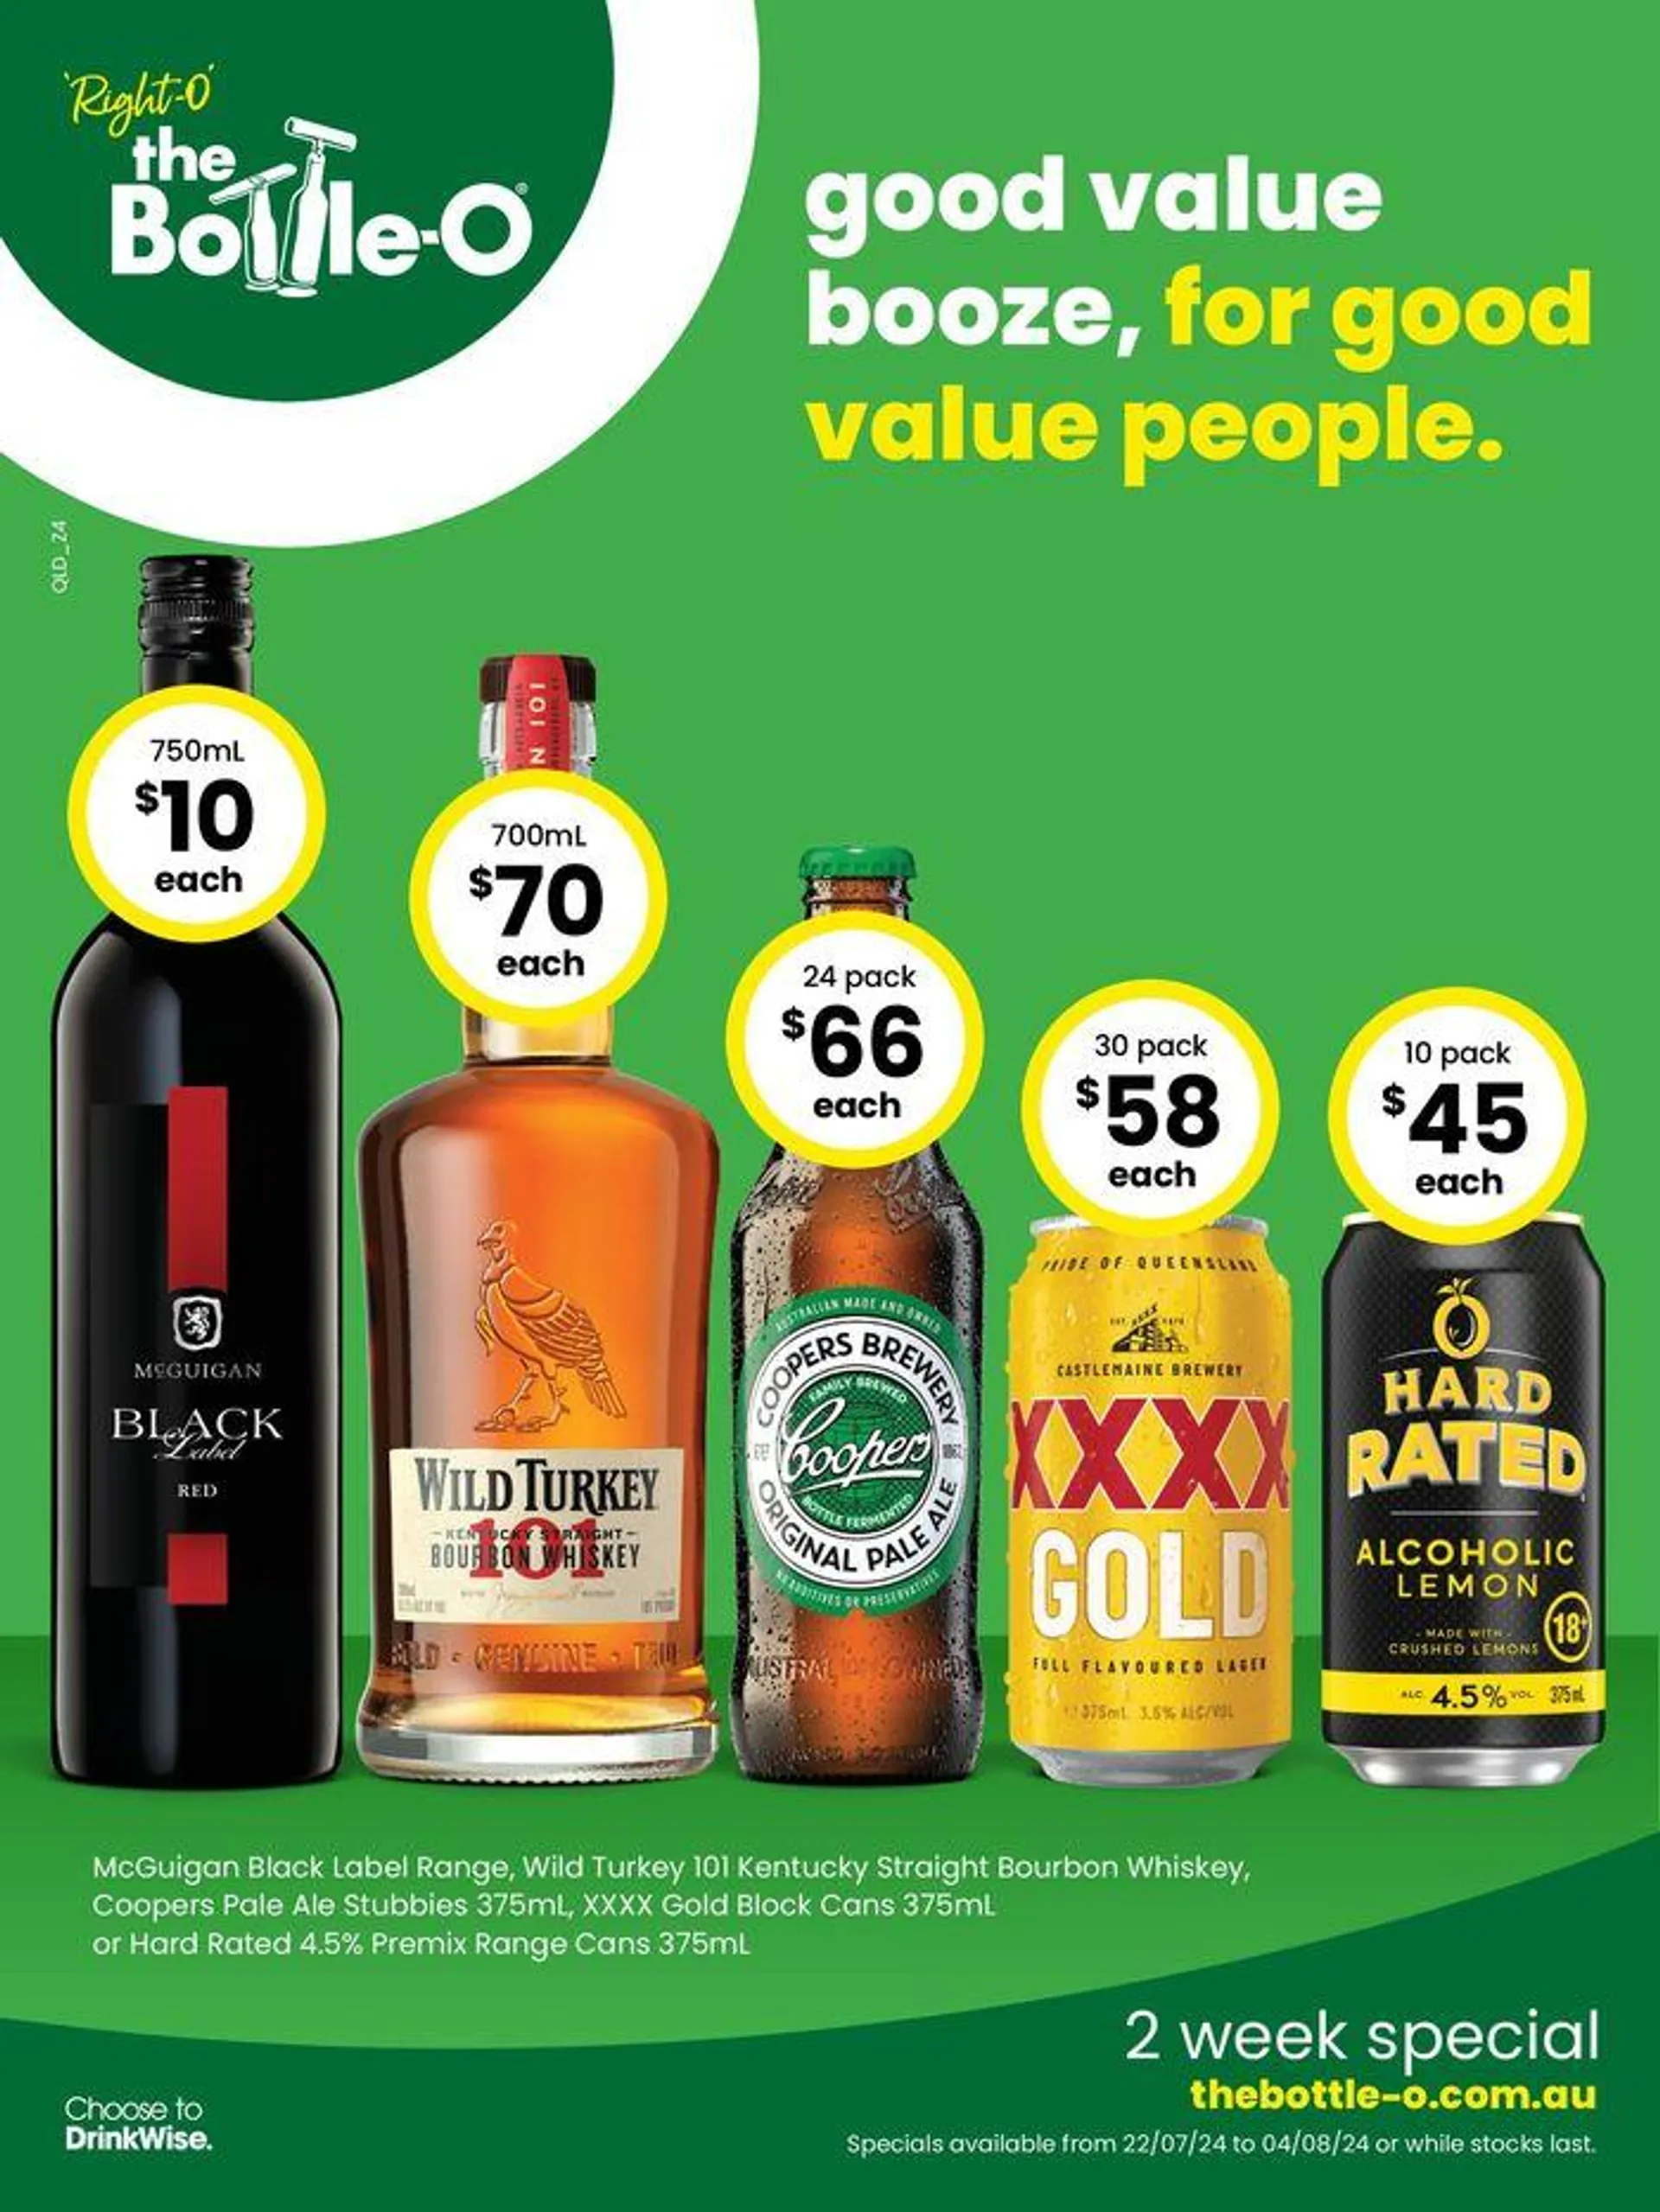 Good Value Booze, For Good Value People 22/07 - 1